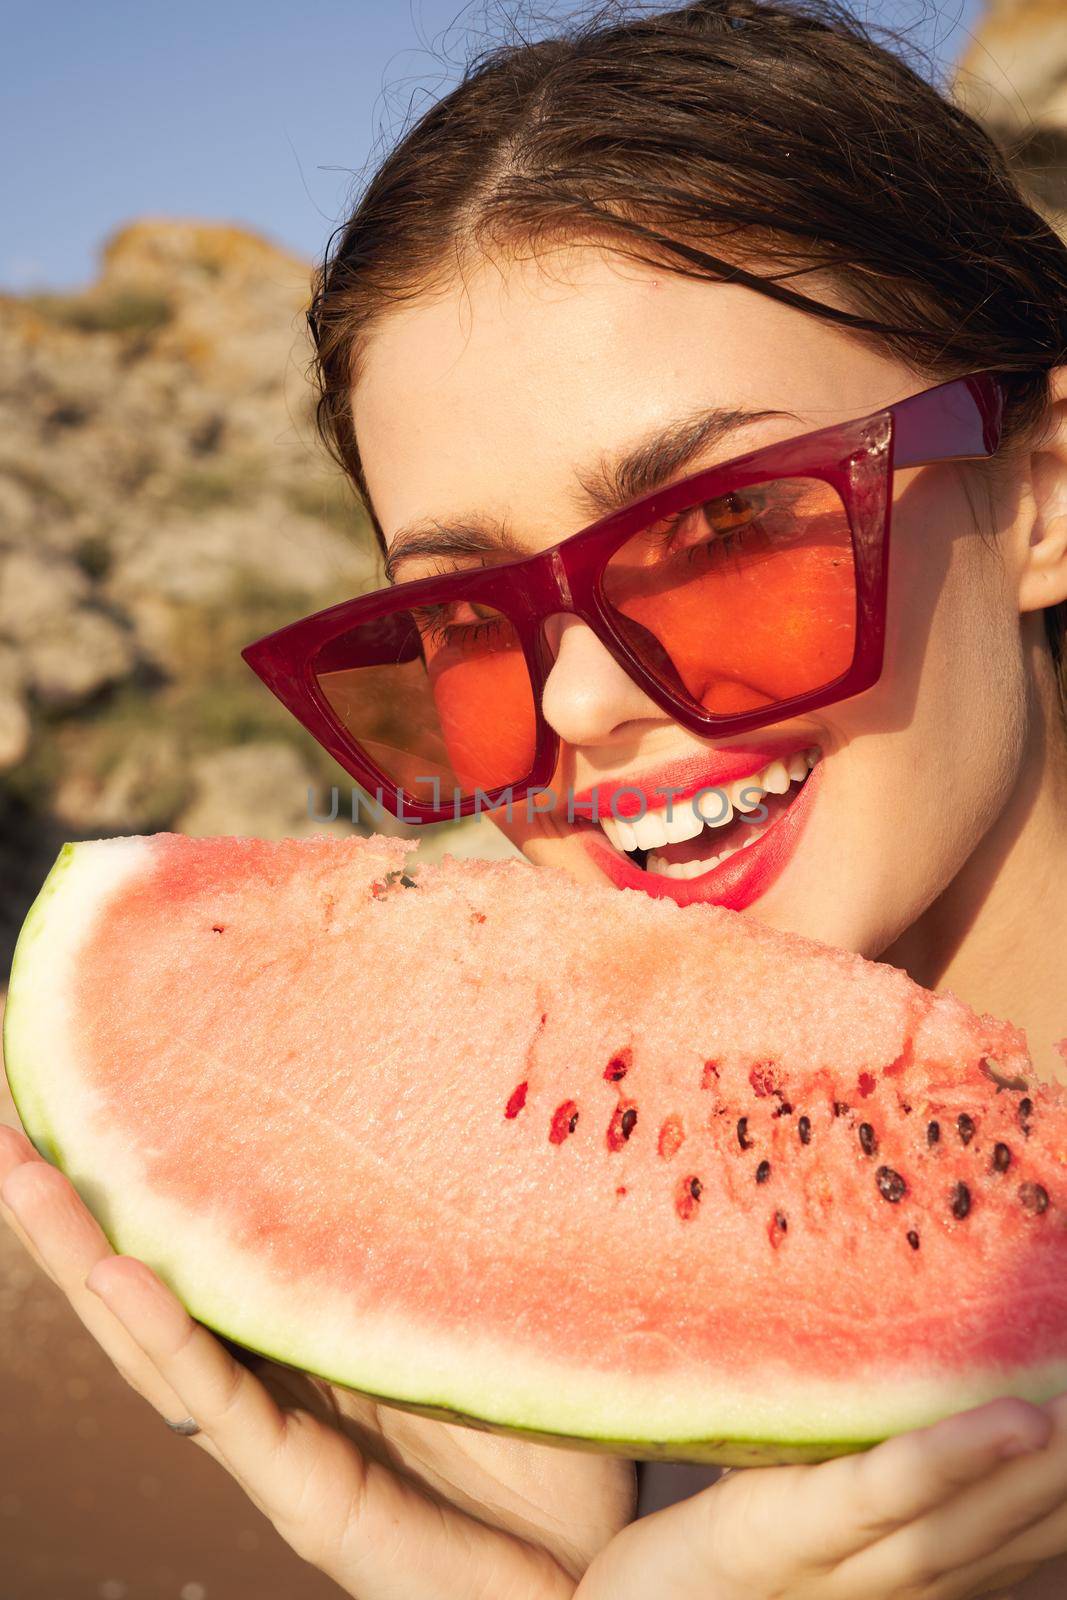 woman eating watermelon outdoors Sun summer close-up by Vichizh